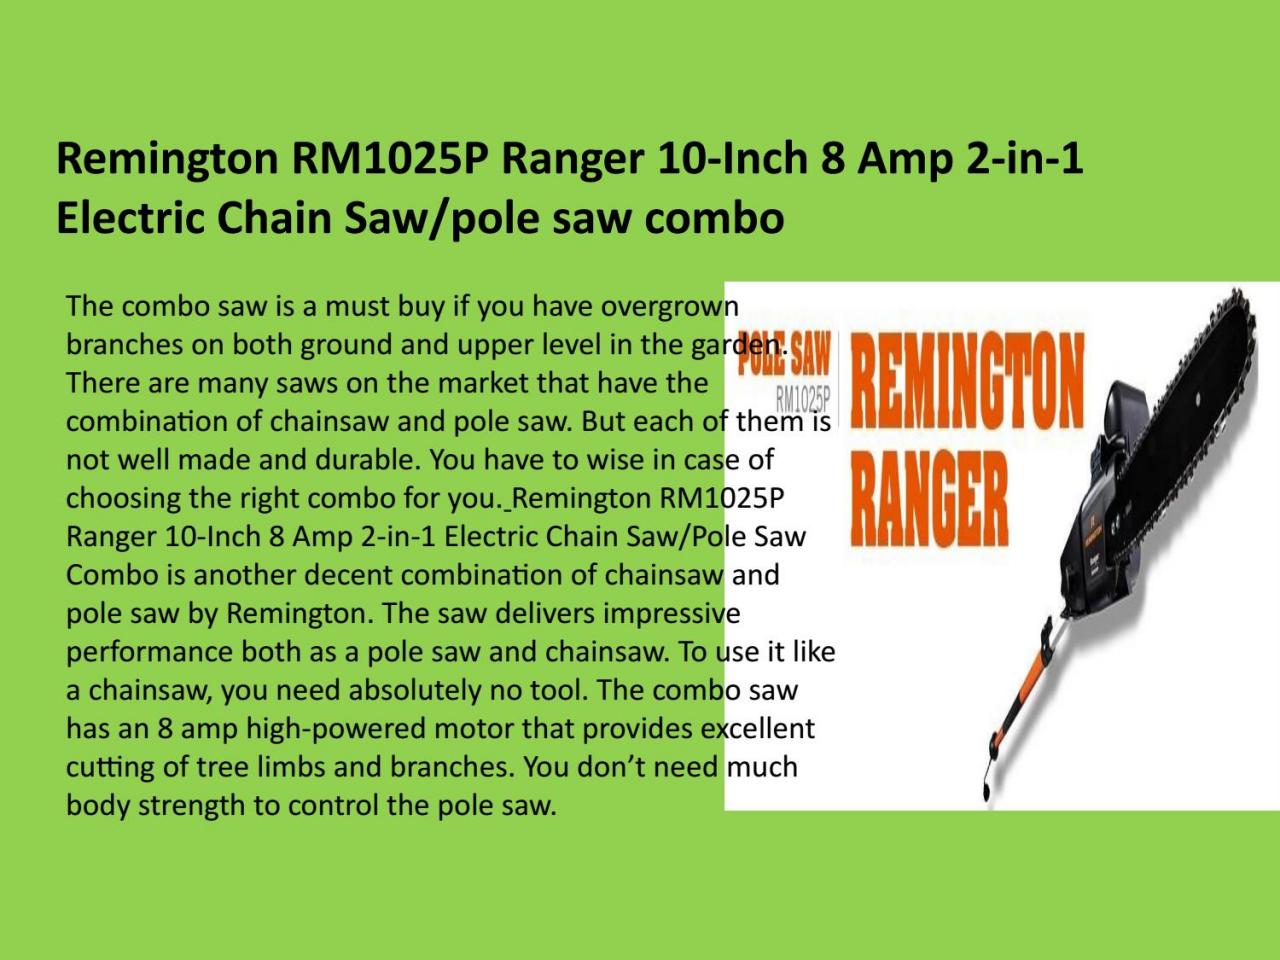 Remington RM1025P Ranger 10-Inch 8 Amp 2-in-1 Electric Chain Saw/pole saw  combo by gardenley - issuu